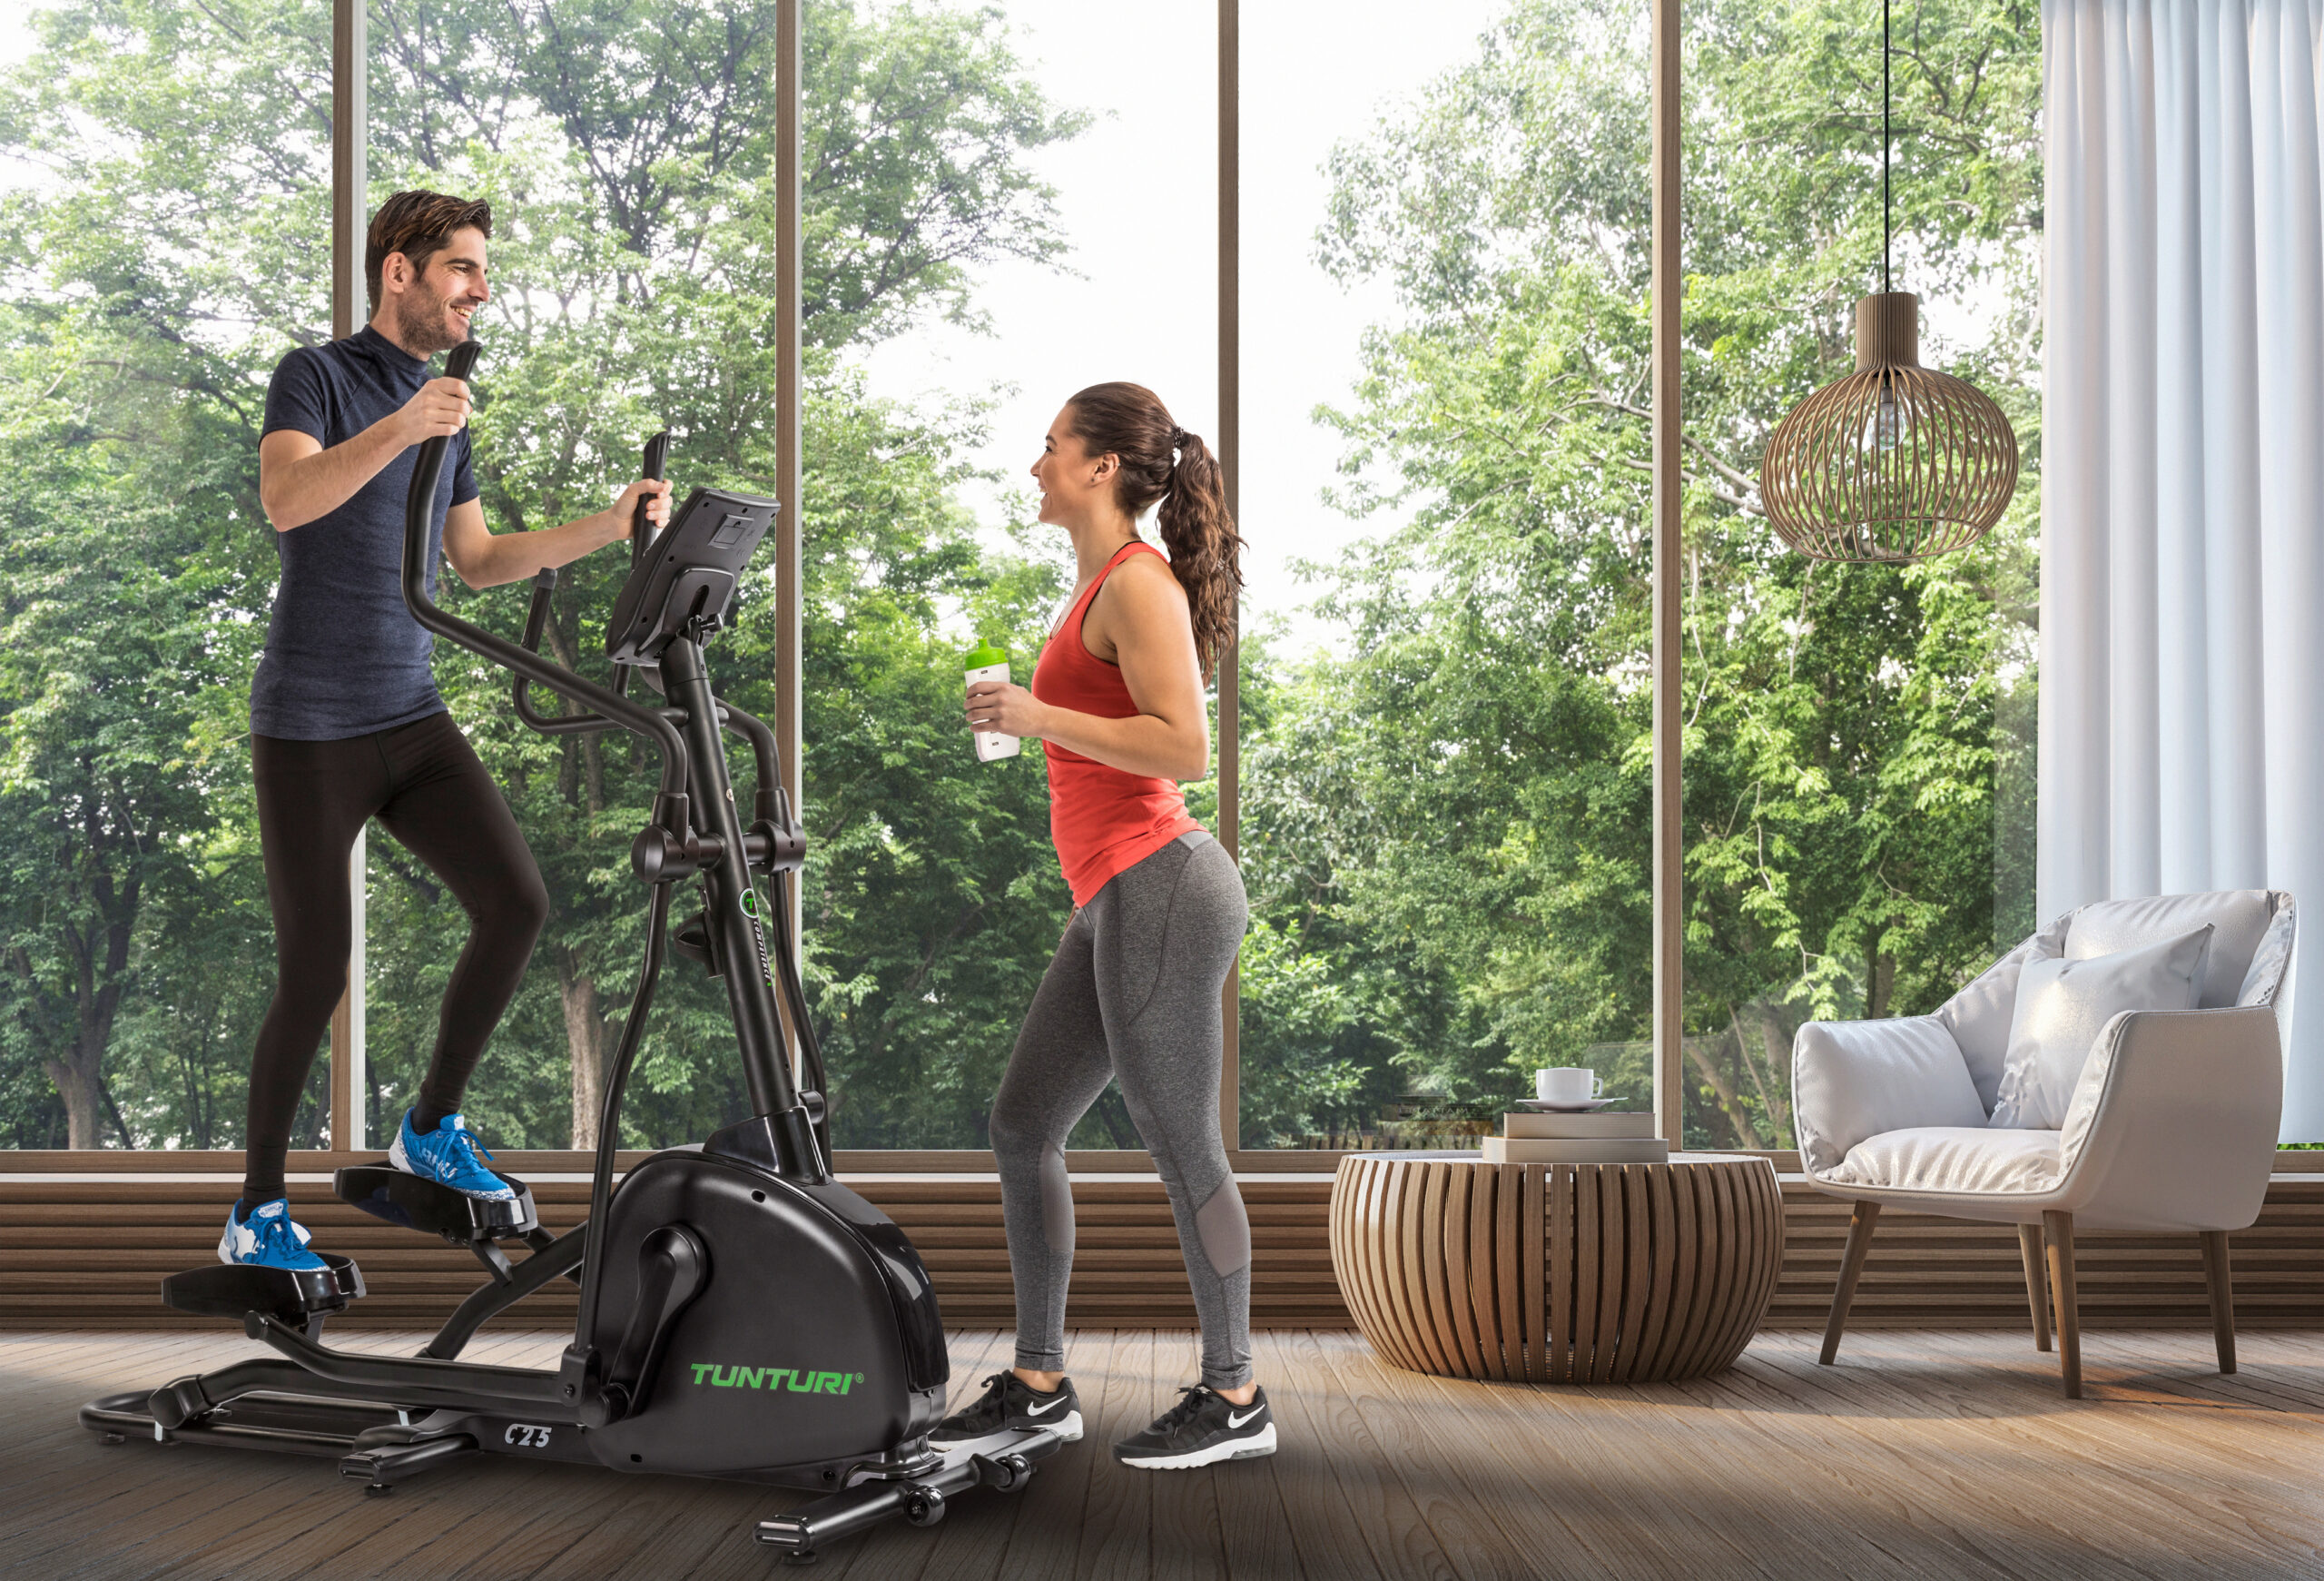 Elliptical trainer - what is it and how to choose? - Velomarket